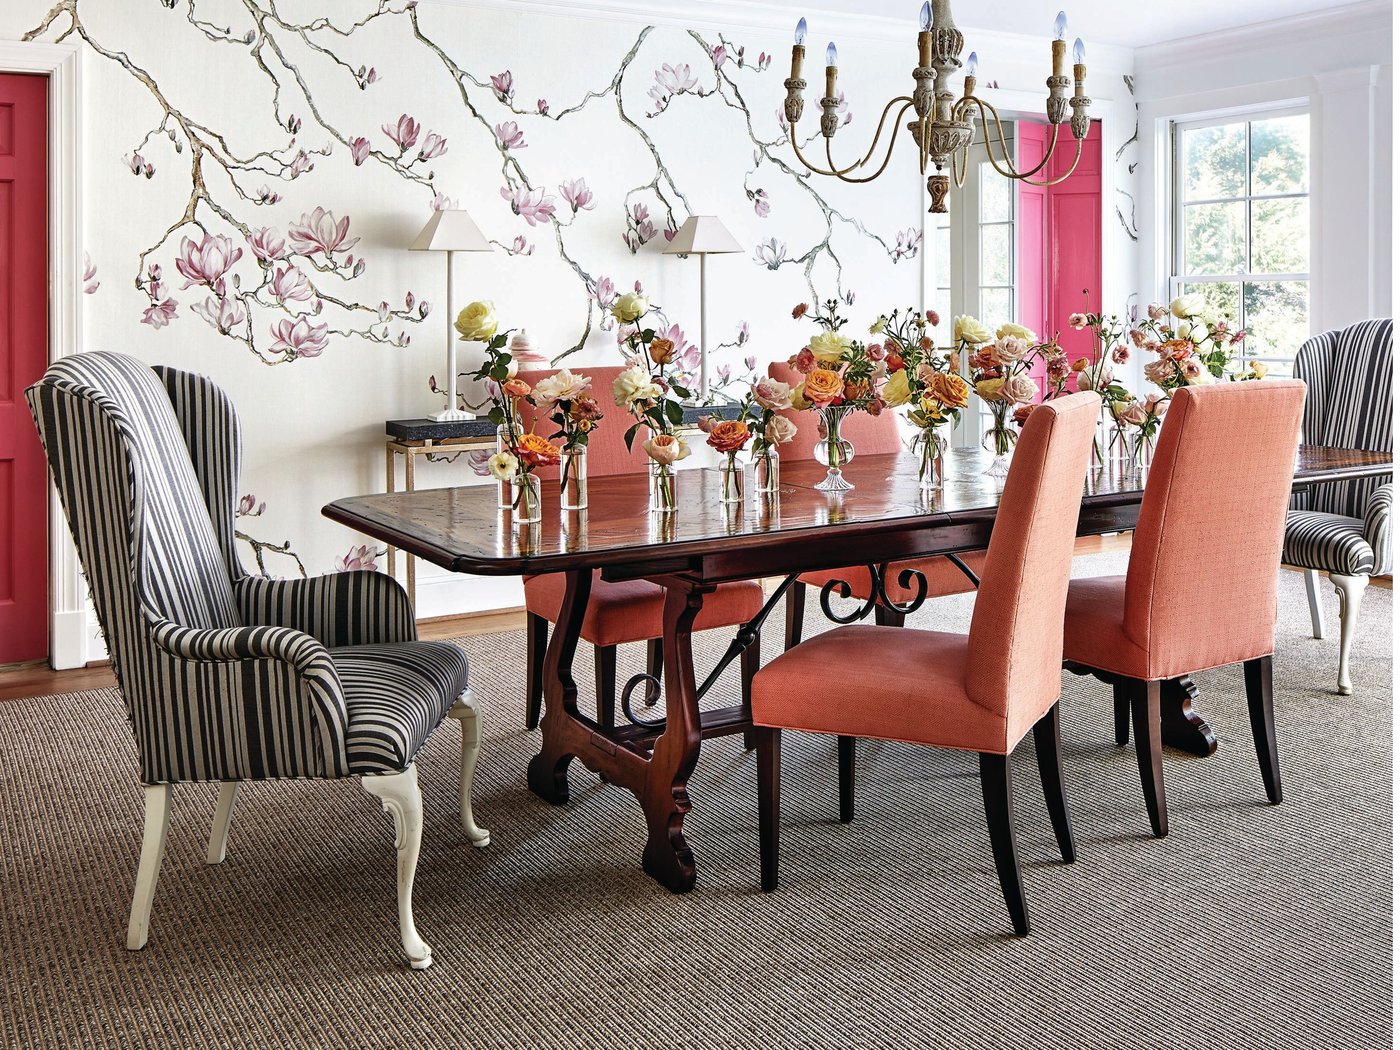 The dining room features whimsical wallpaper from Phillip Jeffries (phillipjeffries.com). PHOTOGRAPHED BY STACY ZARIN GOLDBERG